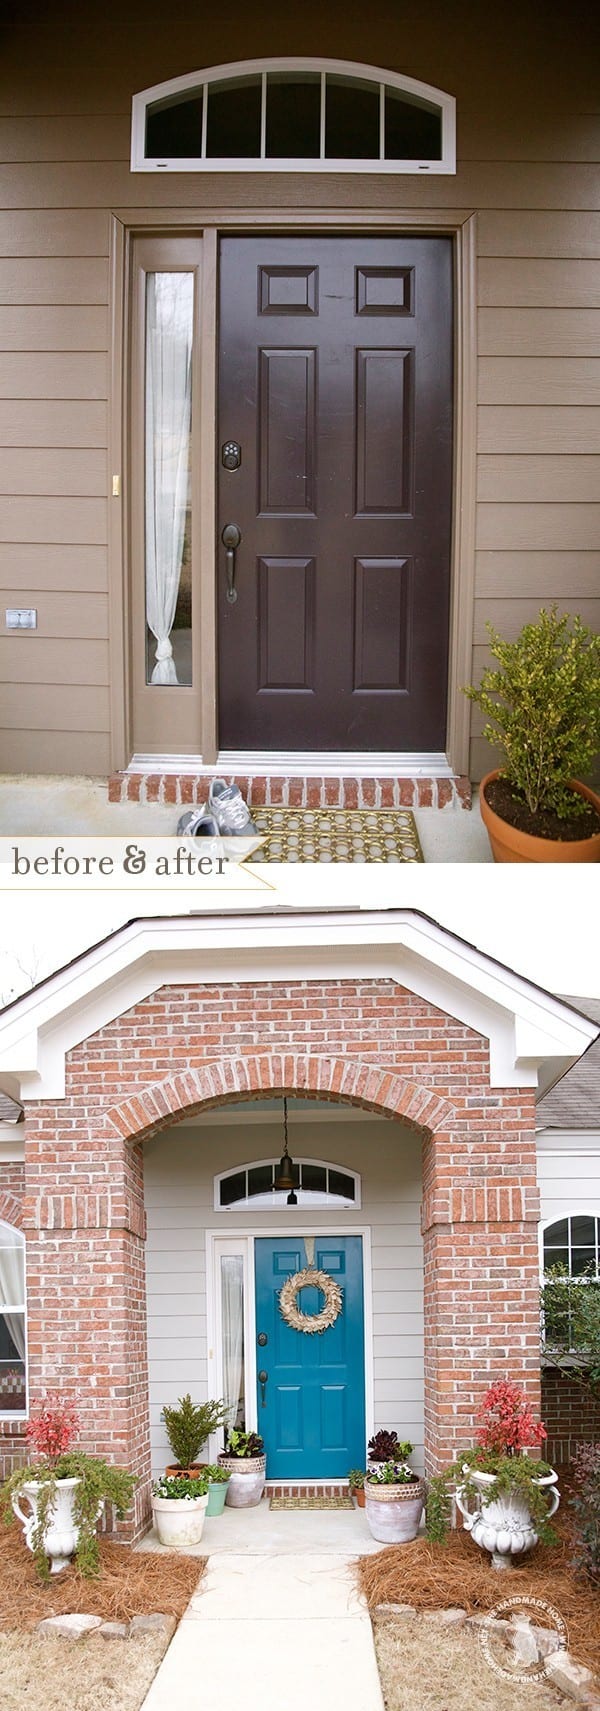 front_door_before_and_after